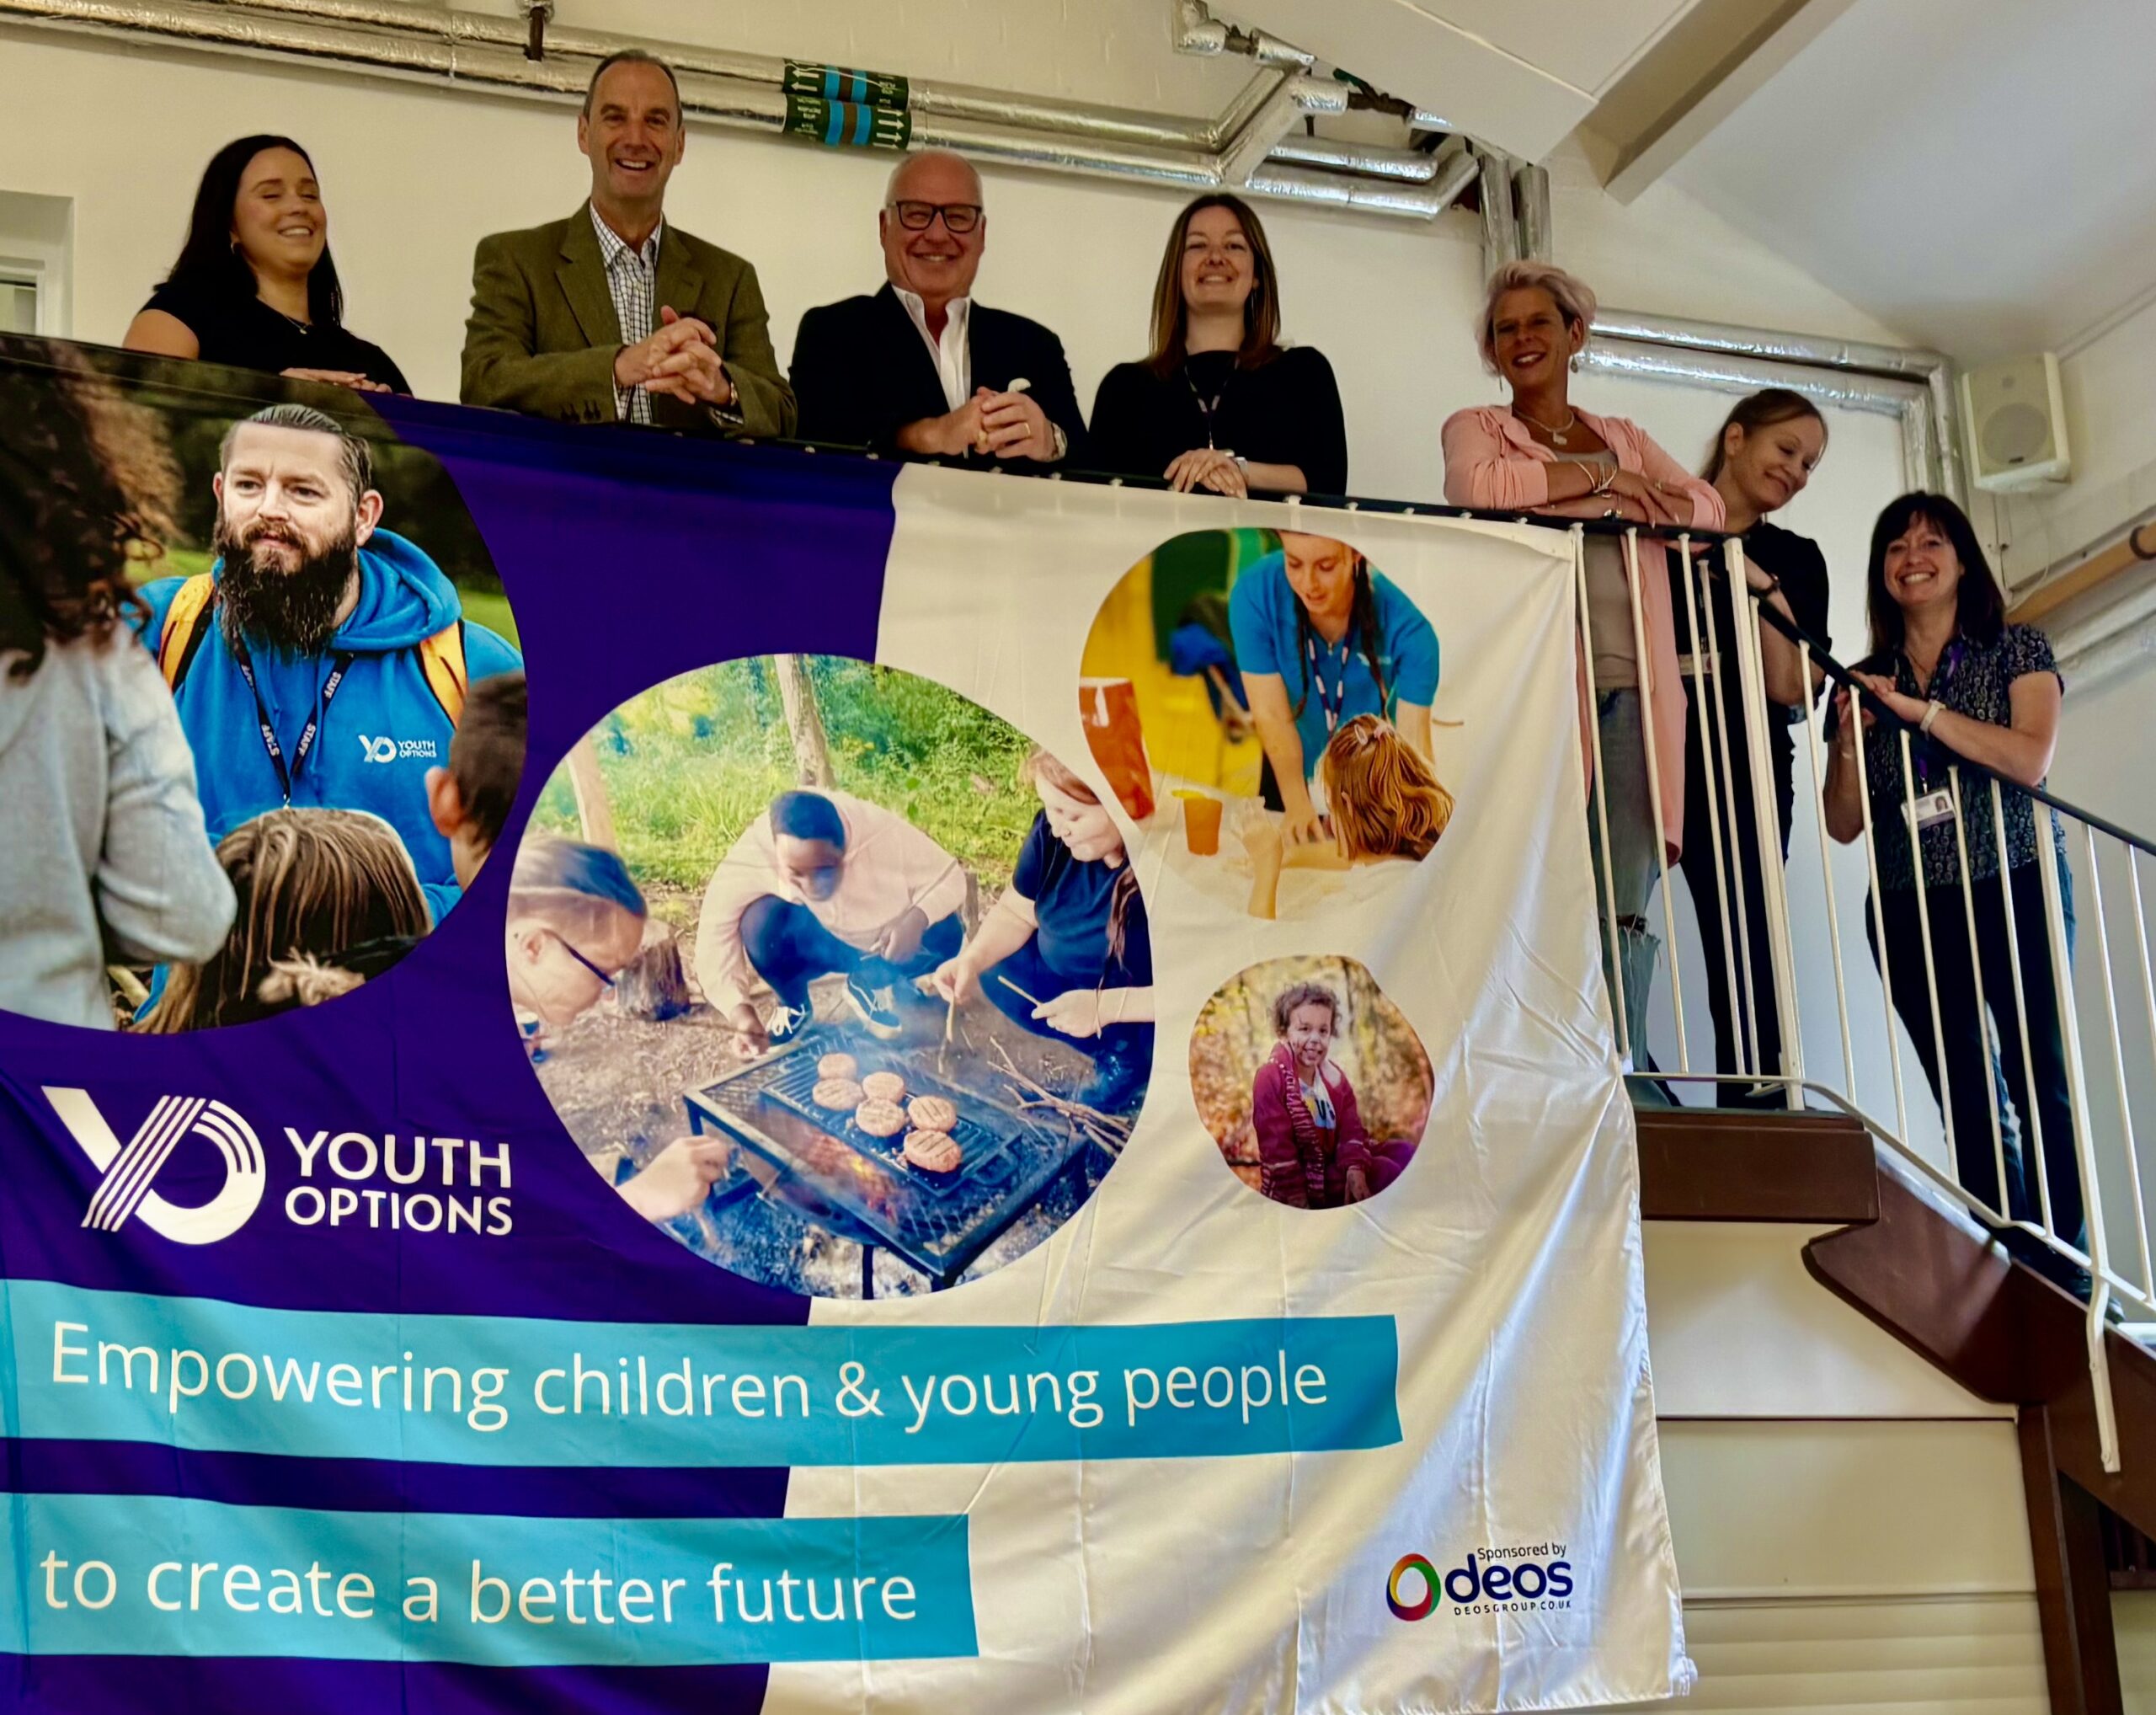 Photo: (l to r) Emily Hoskins Jones, Marketing Officer at Youth Options, Jon Whitaker, John Pearson, Charity Lead for Hampshire & IoW Freemasons, Jemma Cowley, Lead Worker on the NVR Project and members of her team.